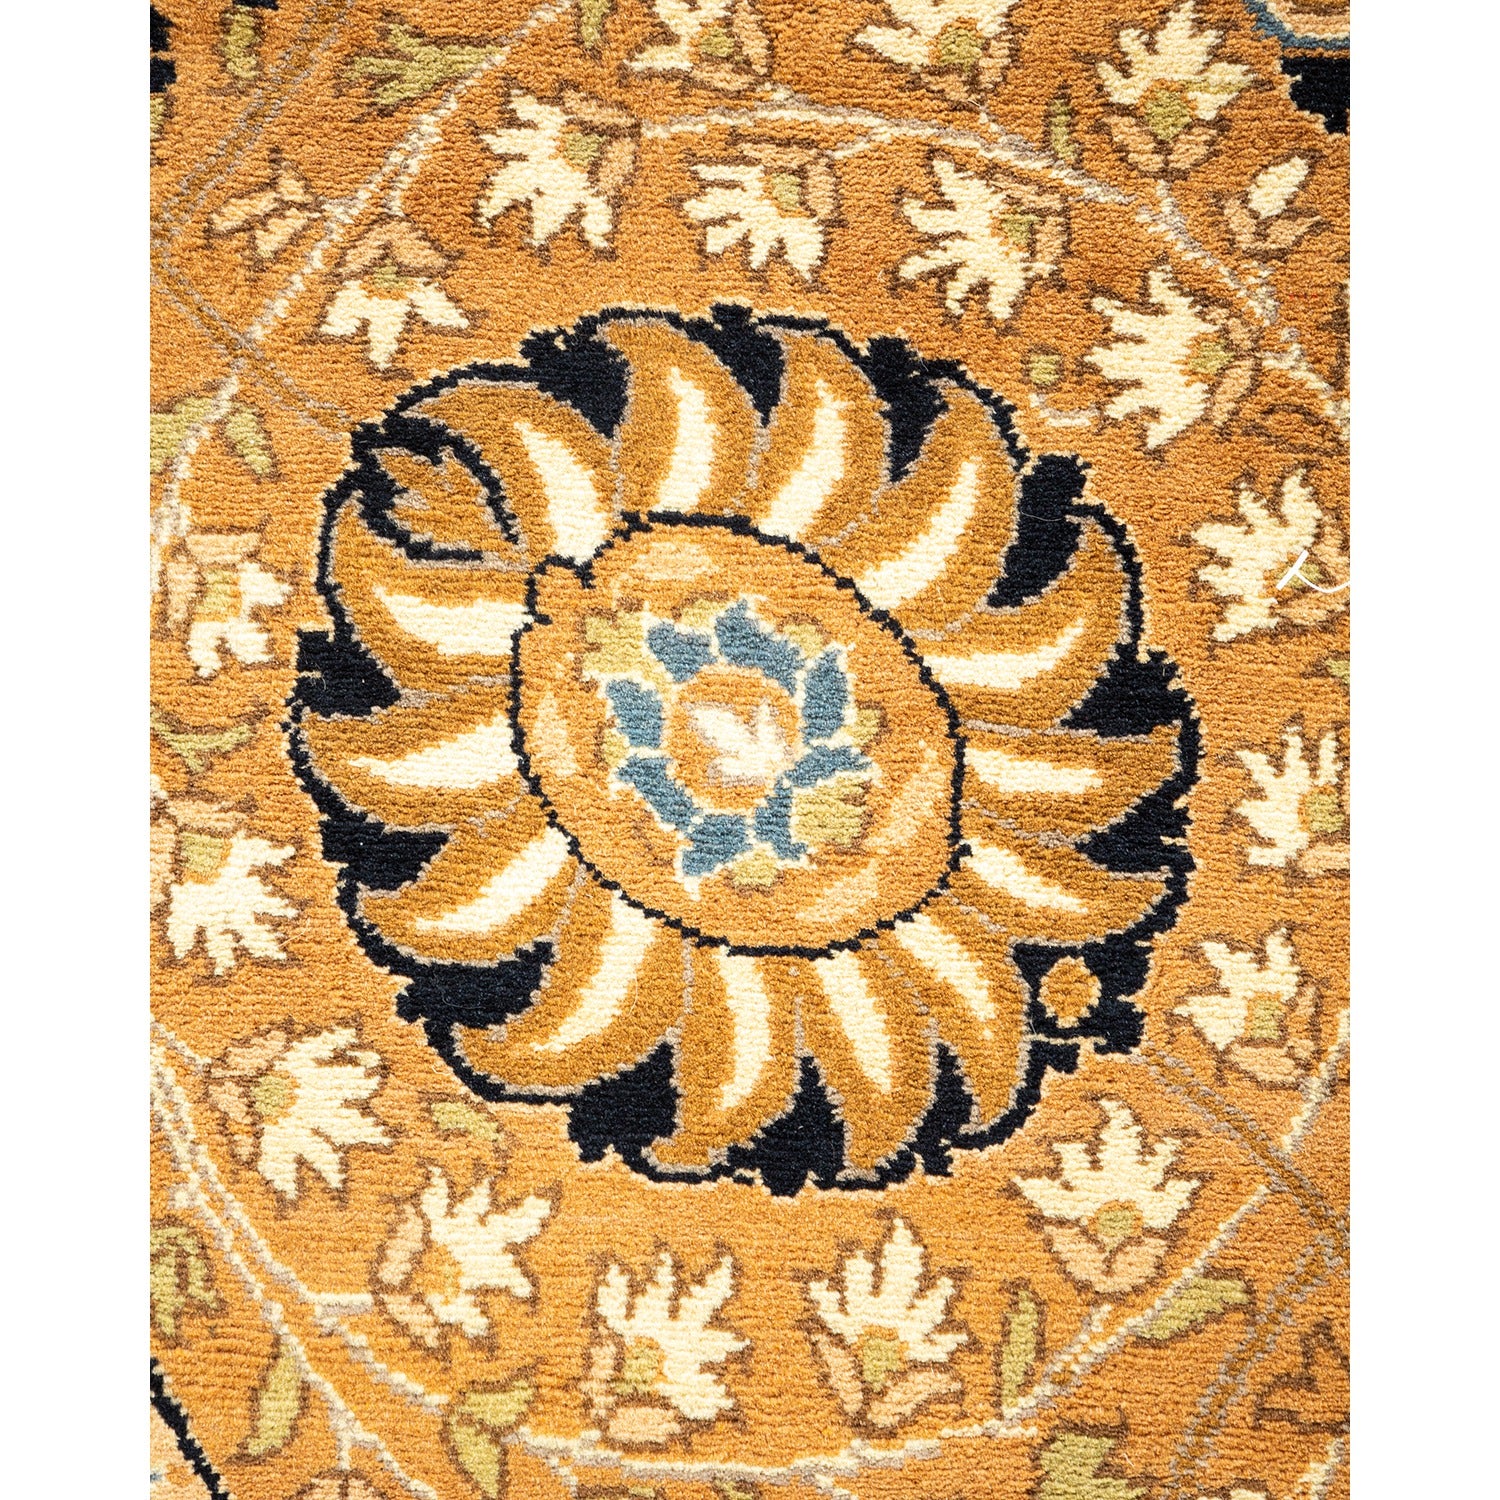 Handwoven, high-quality carpet with intricate floral design in black, cream, and blue.